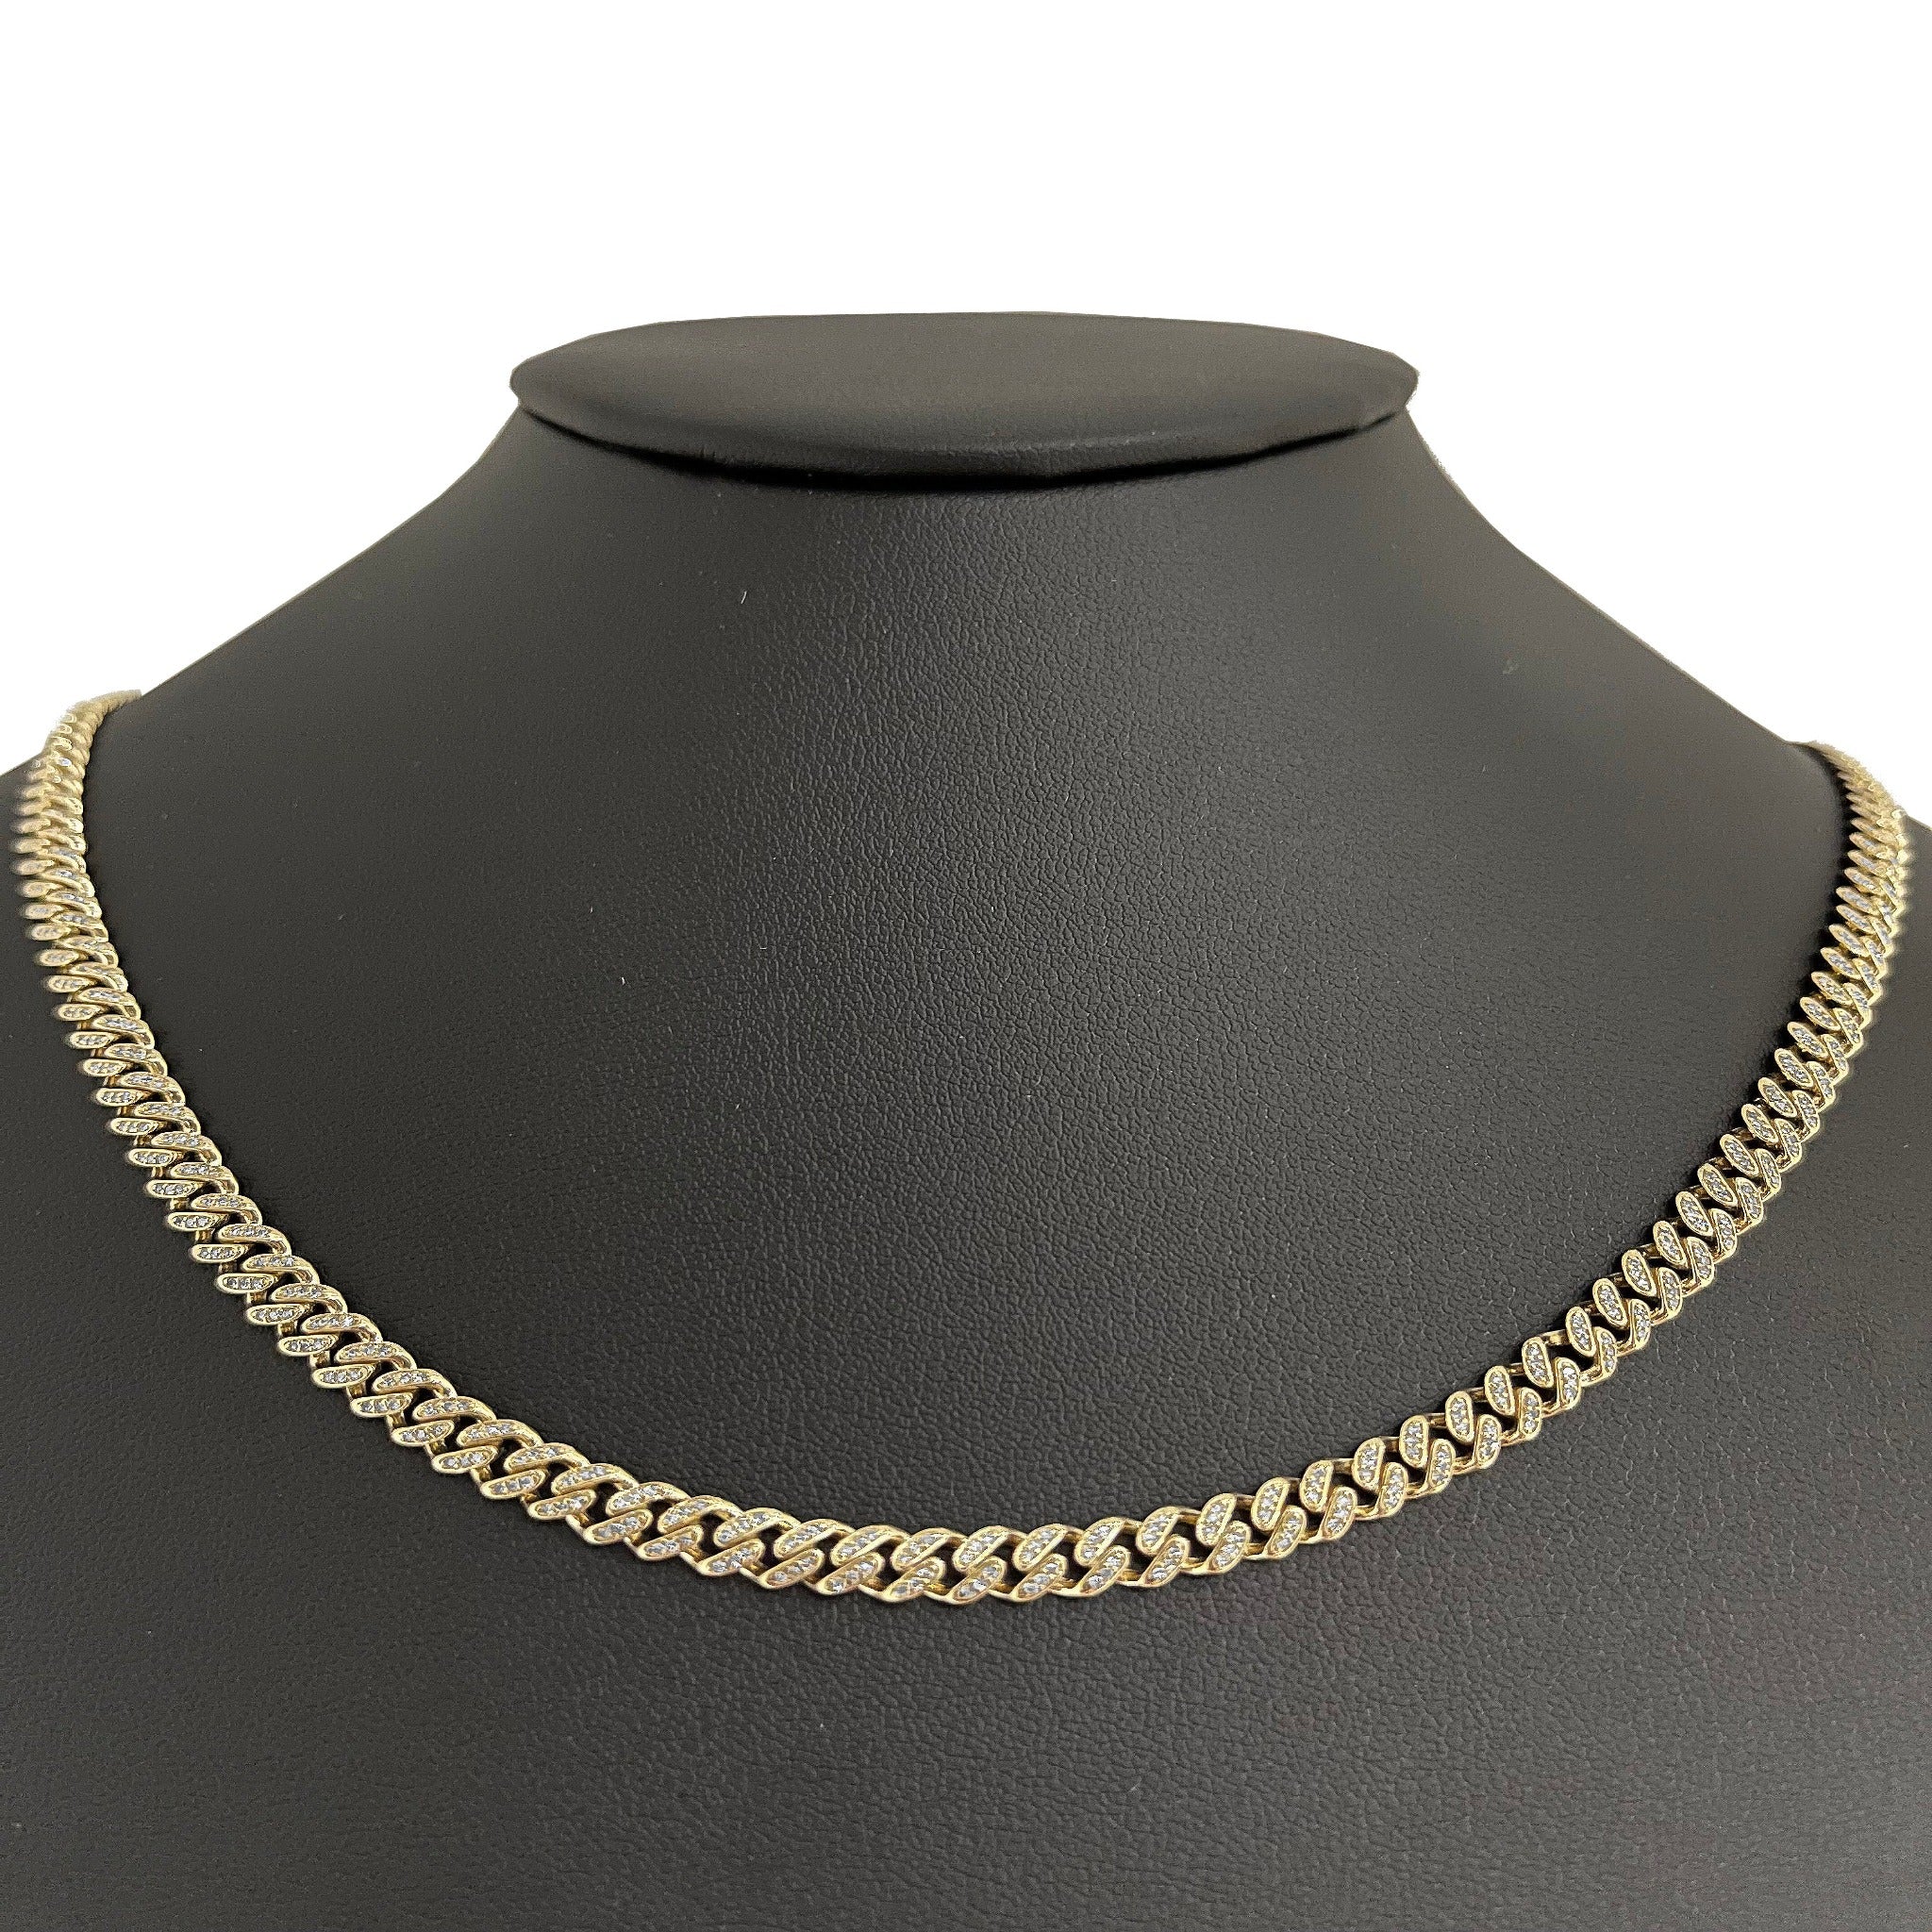 ''SPECIAL! 5mm 1.75ct G SI 14k Yellow Gold DIAMOND Round Cuban Necklace 22''''''